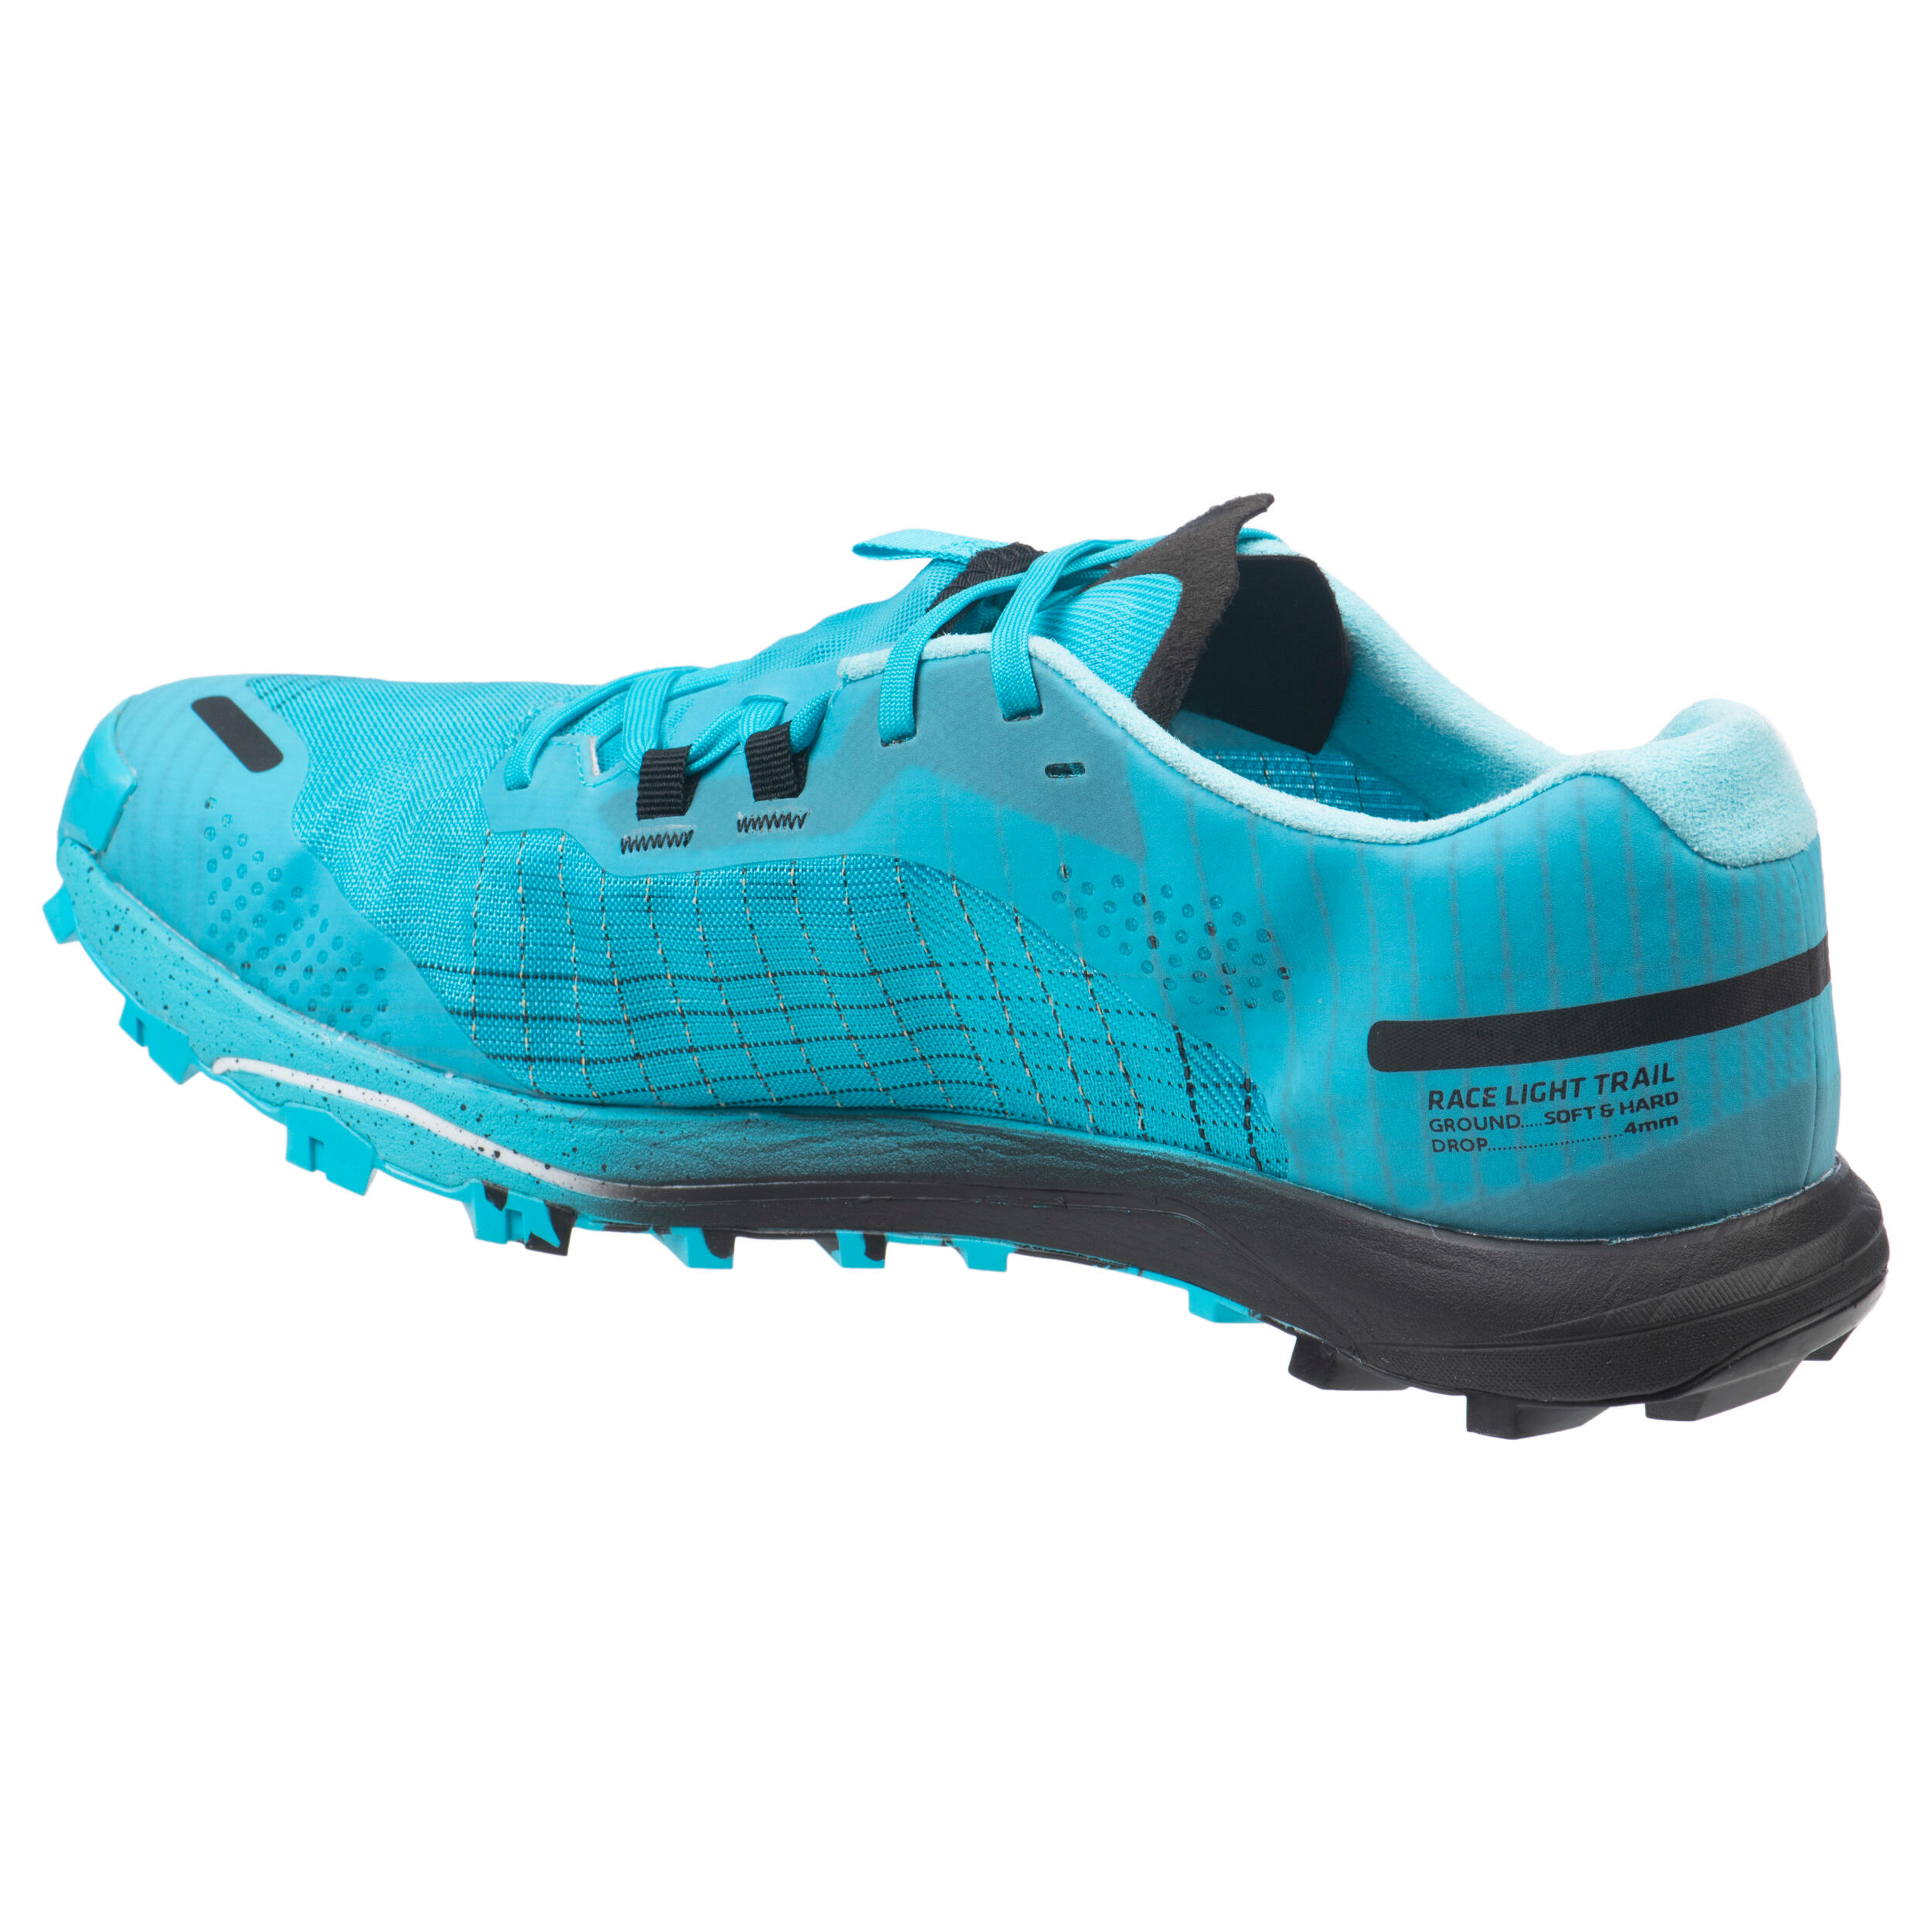 Race Light Men's Trail Running Shoes - sky blue and black 2/14